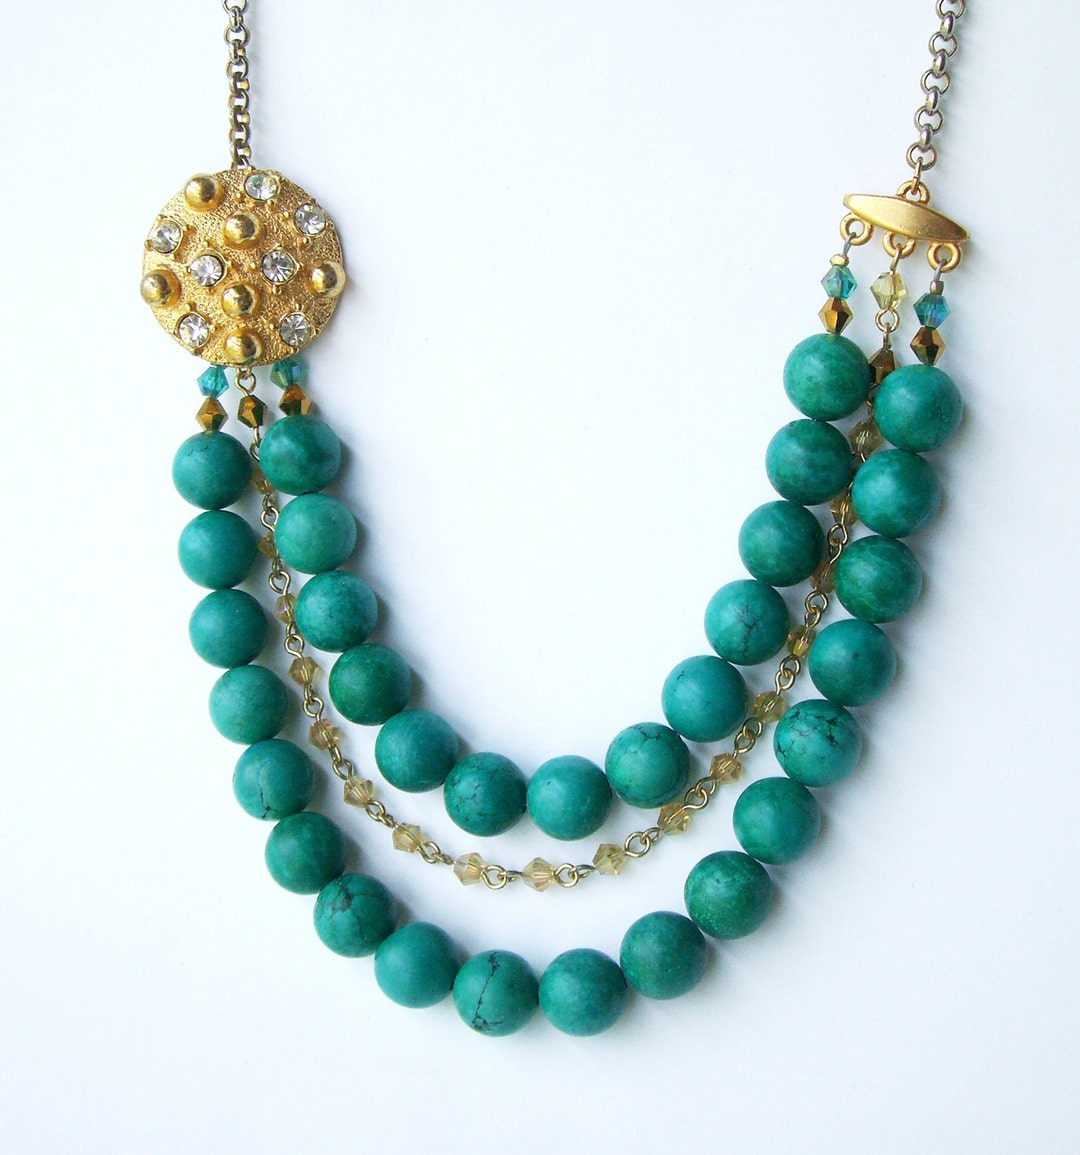 Green Vintage Style Necklace With Vintage Button - Etsy